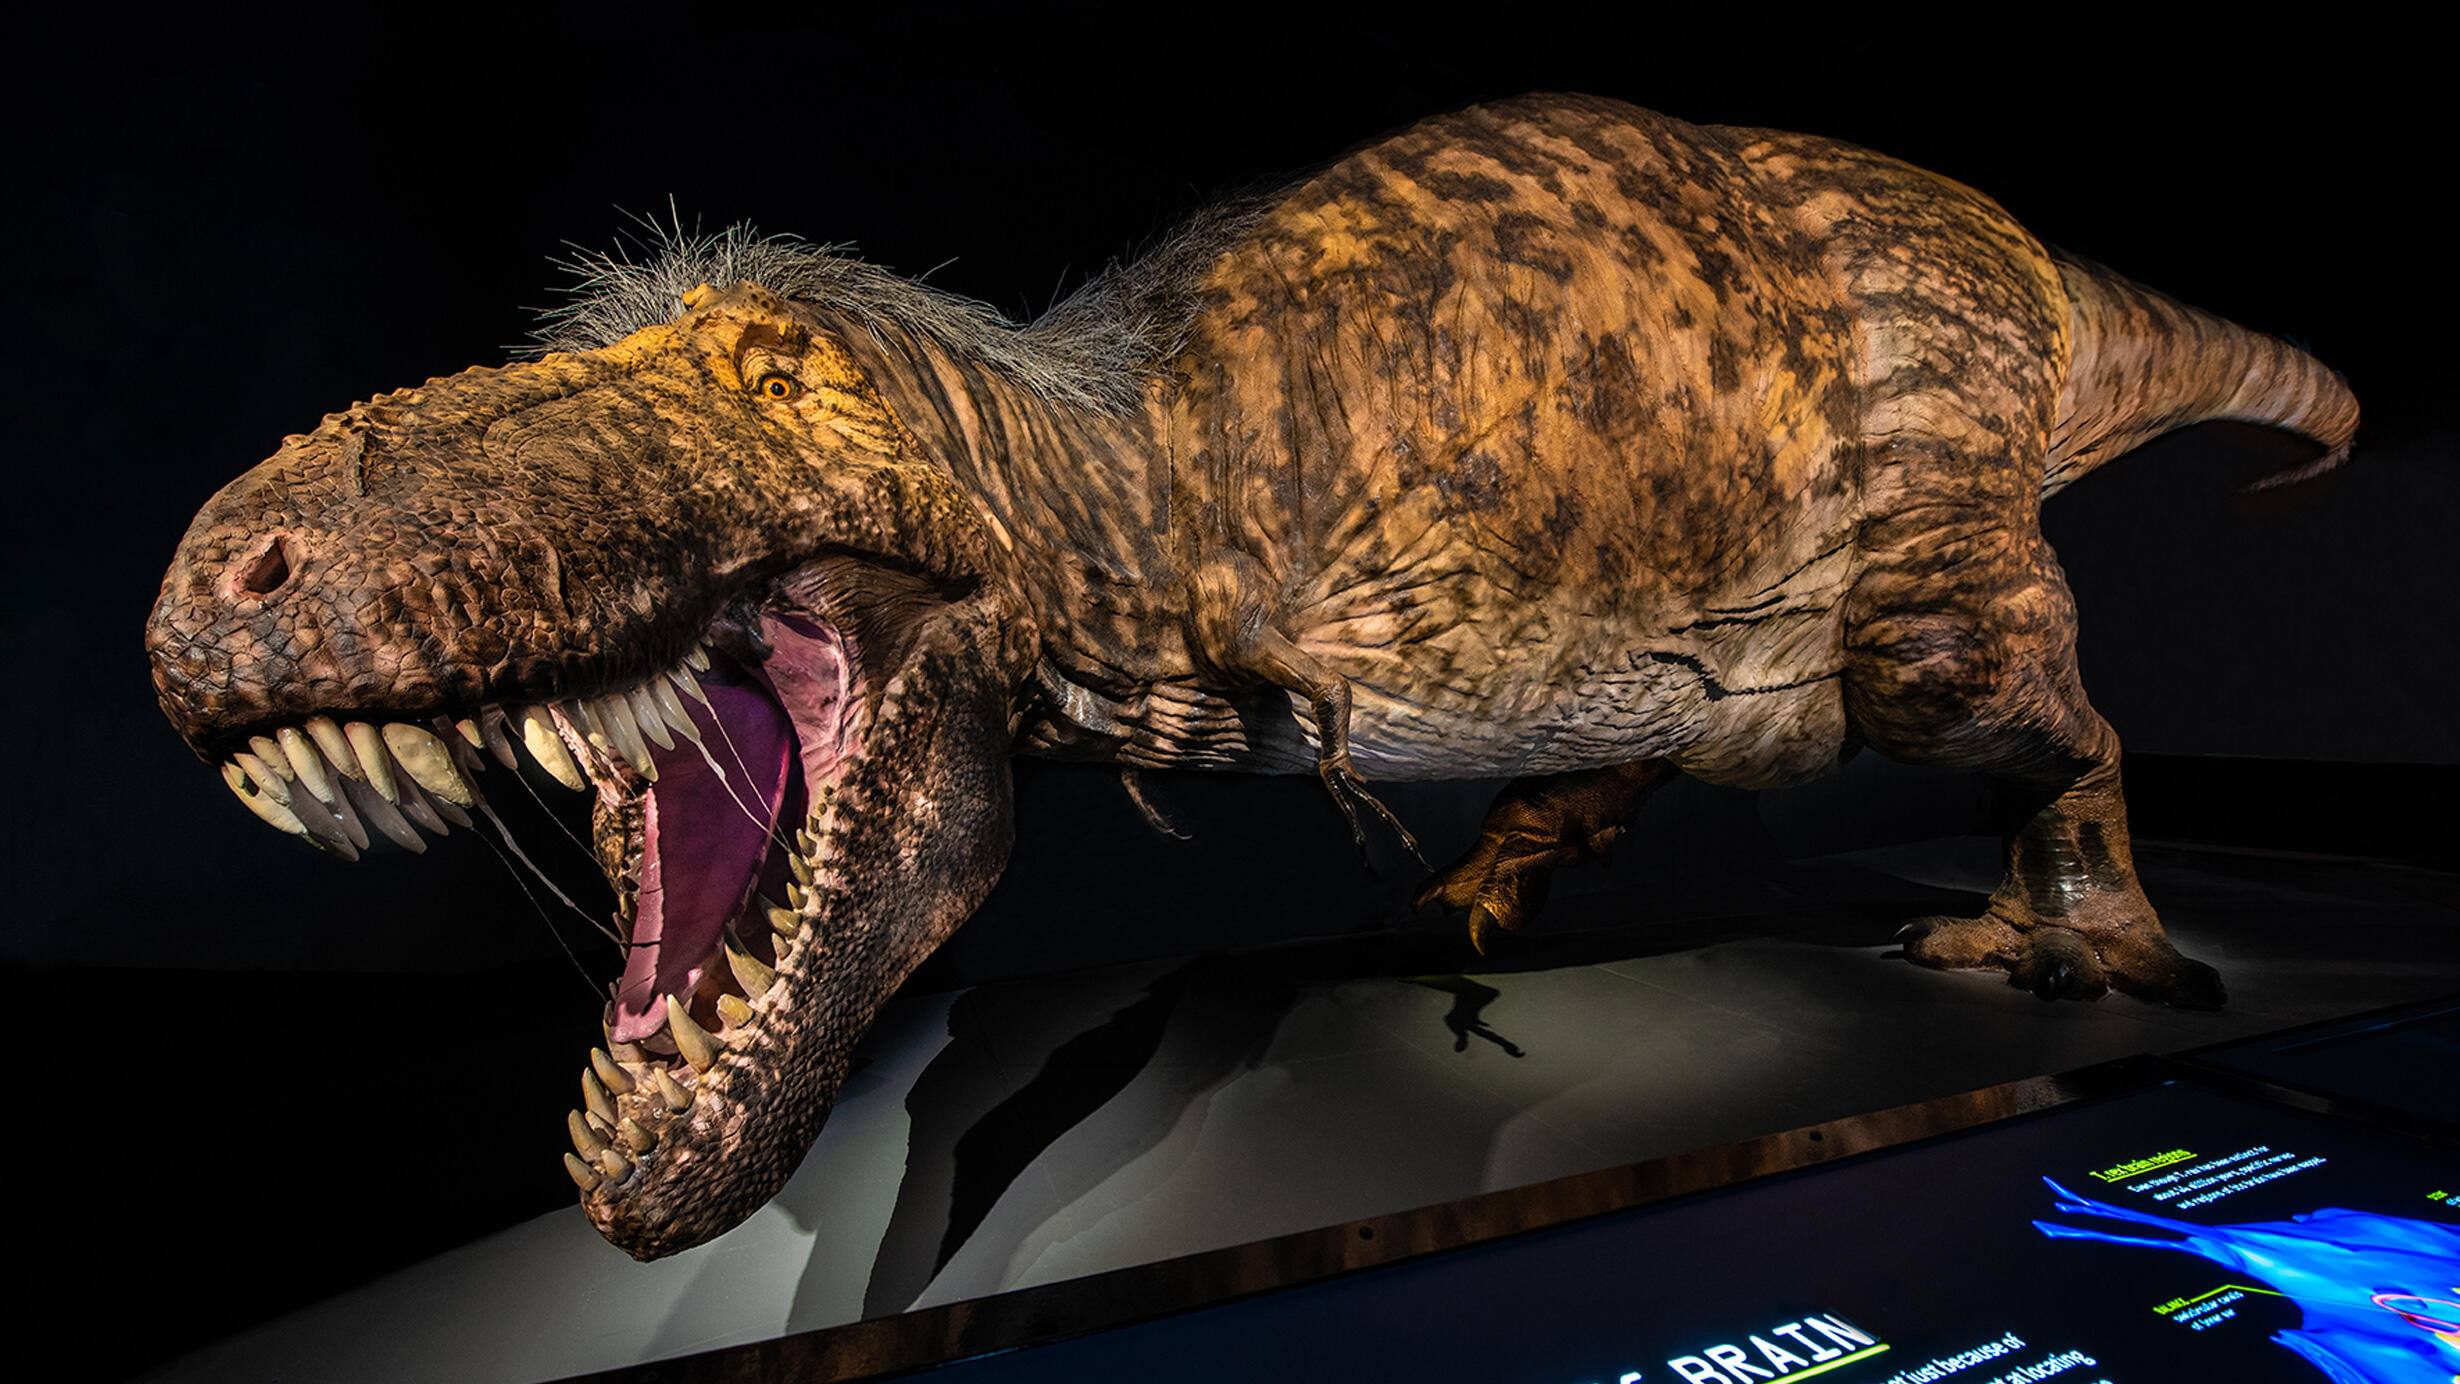 A life-sized fleshed out model of a T. rex is positioned lunging forward toward the viewer with its jaws open to expose rows of teeth with saliva